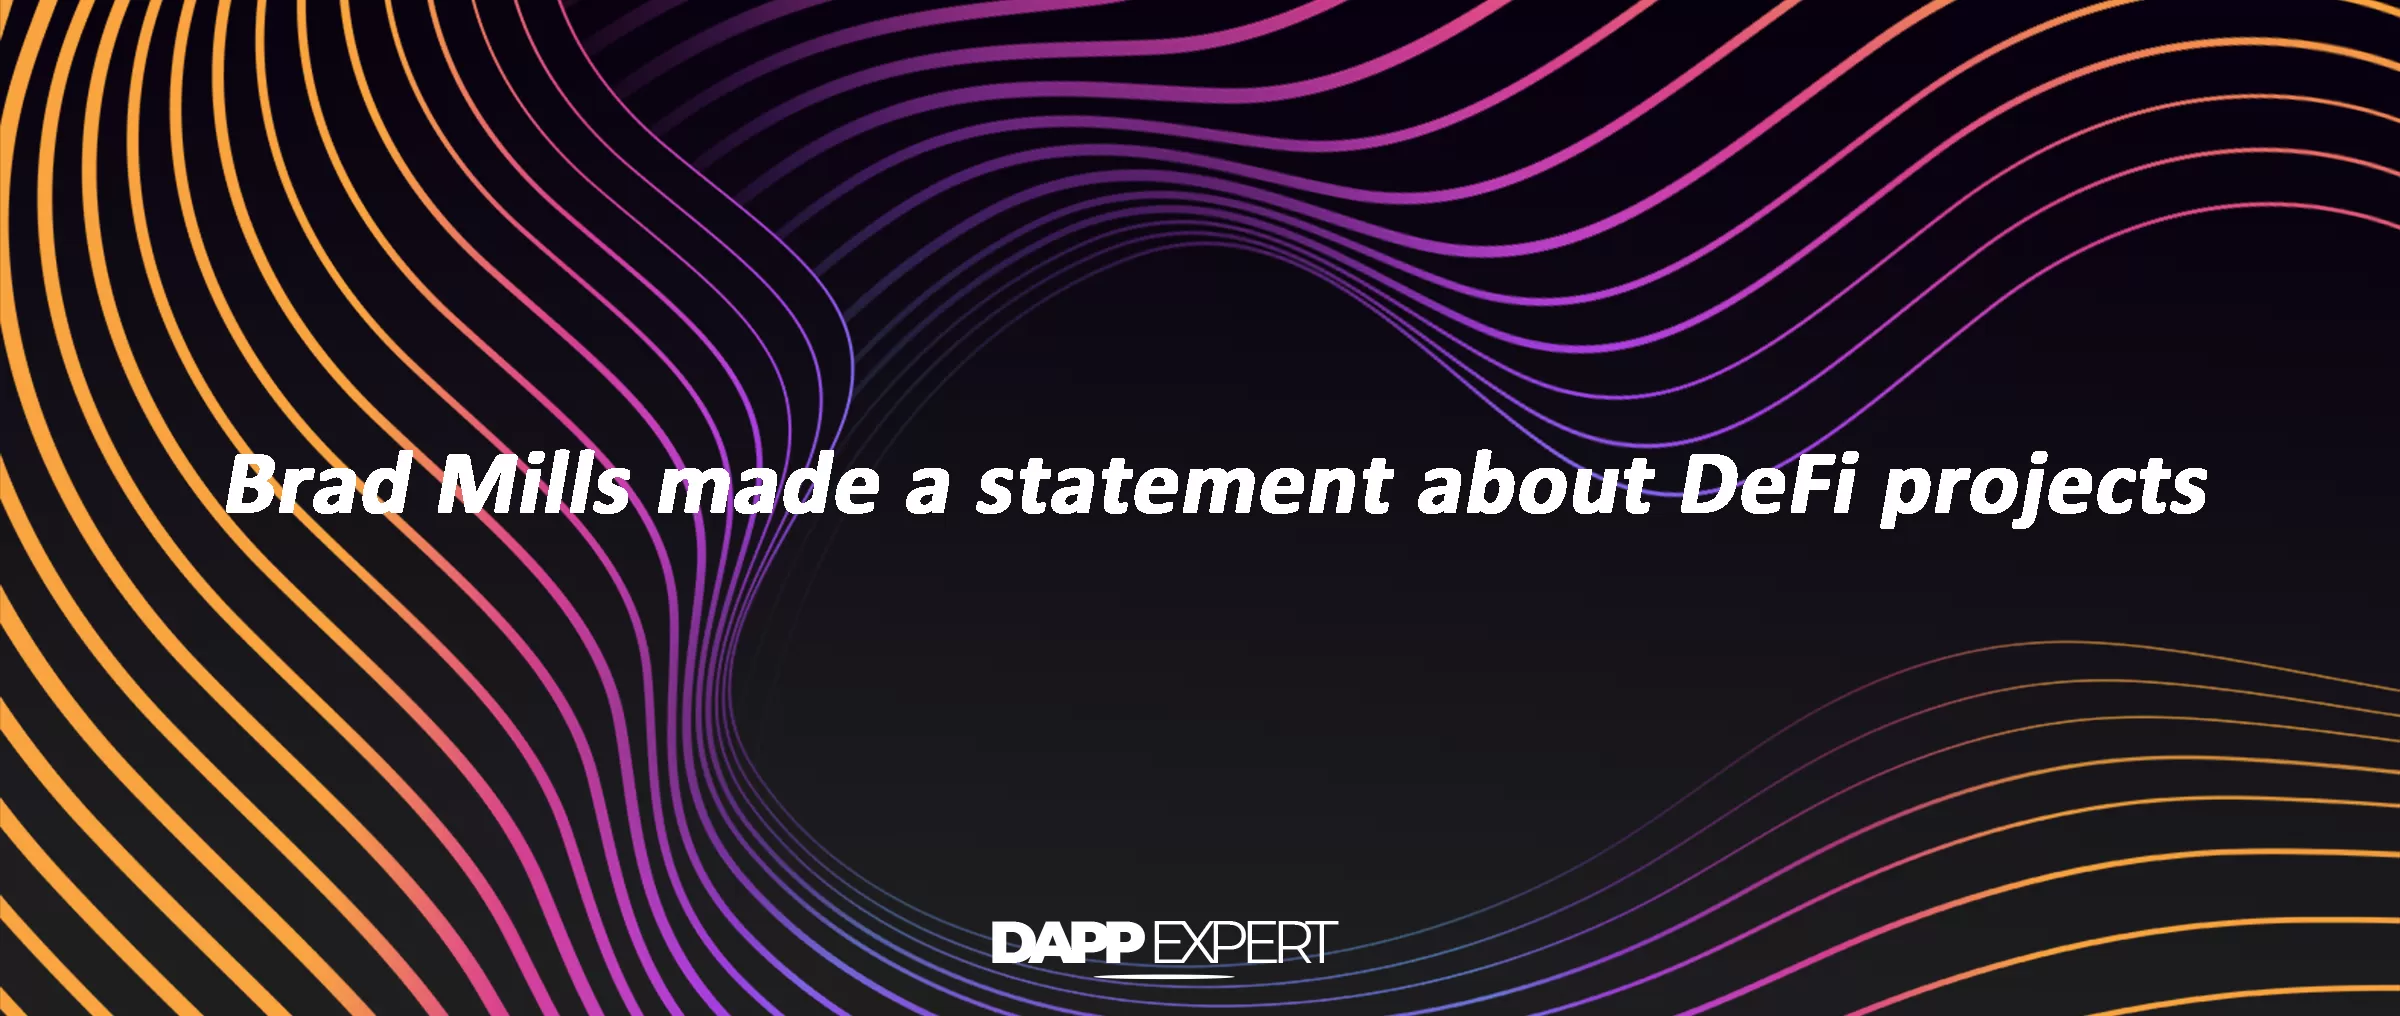 Brad Mills made a statement about DeFi projects